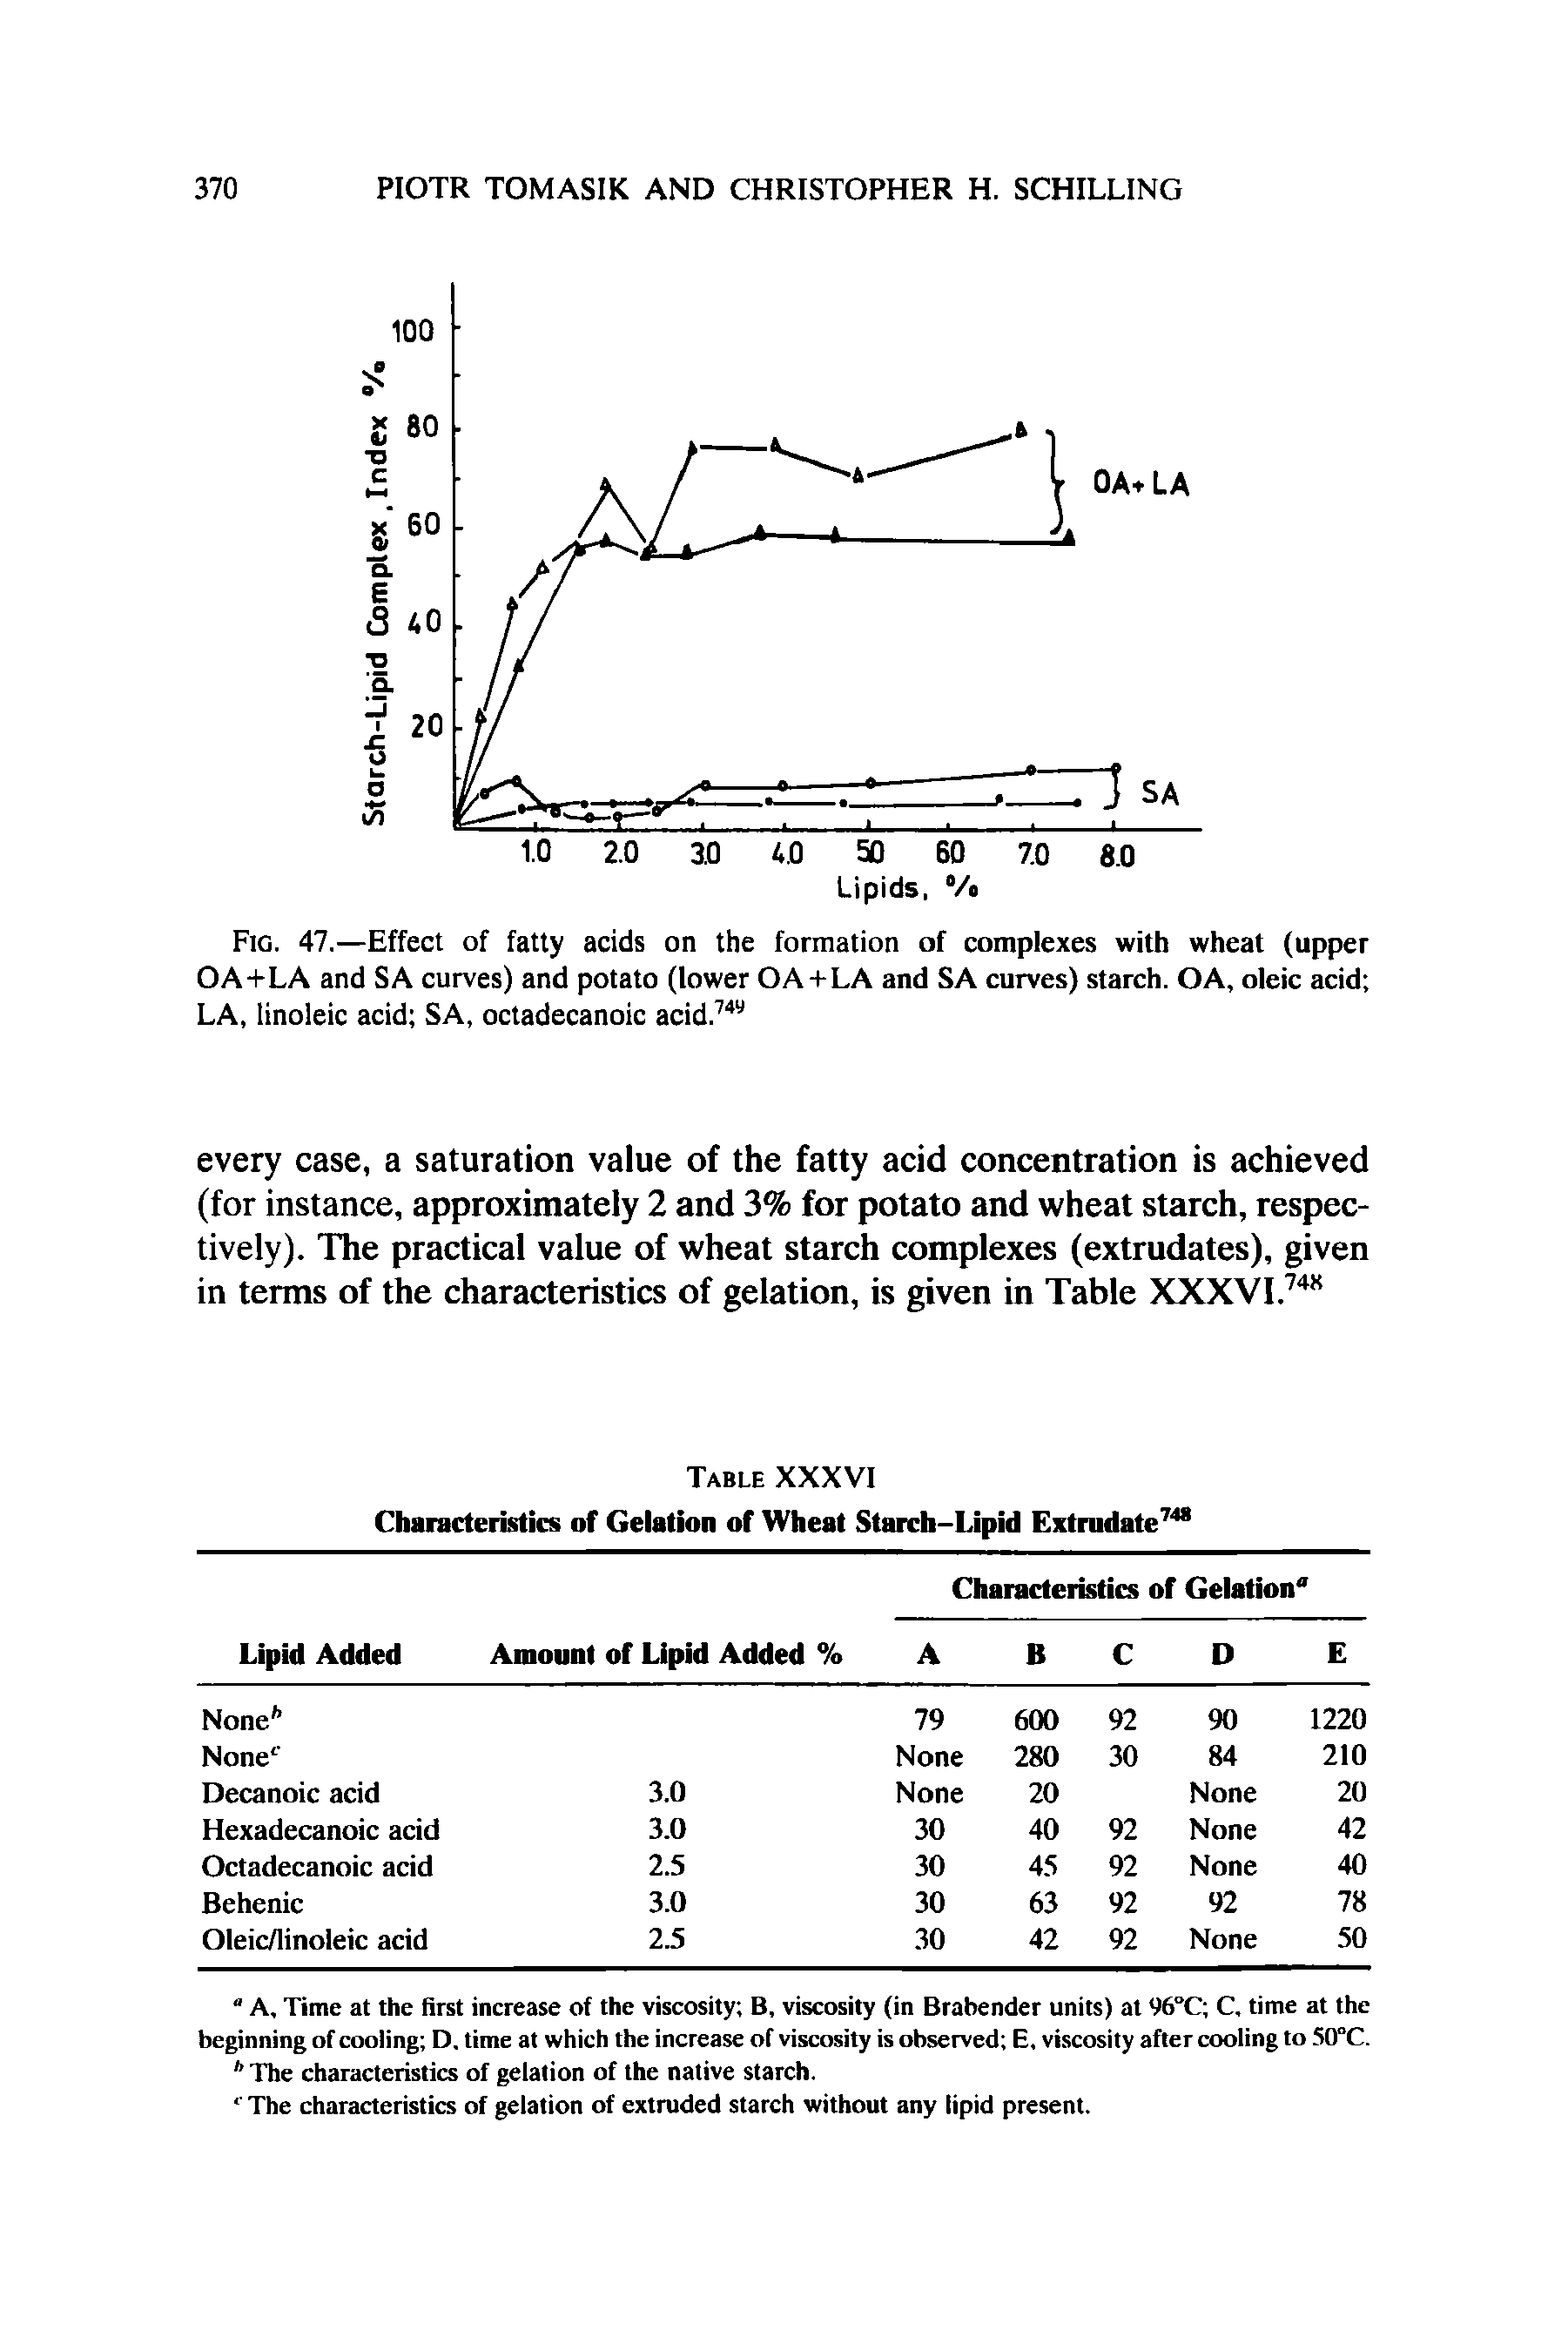 Fig. 47.—Effect of fatty acids on the formation of complexes with wheat (upper OA+LA and SA curves) and potato (lower OA + LA and SA curves) starch. OA, oleic acid LA, linoleic acid SA, octadecanoic acid.749...